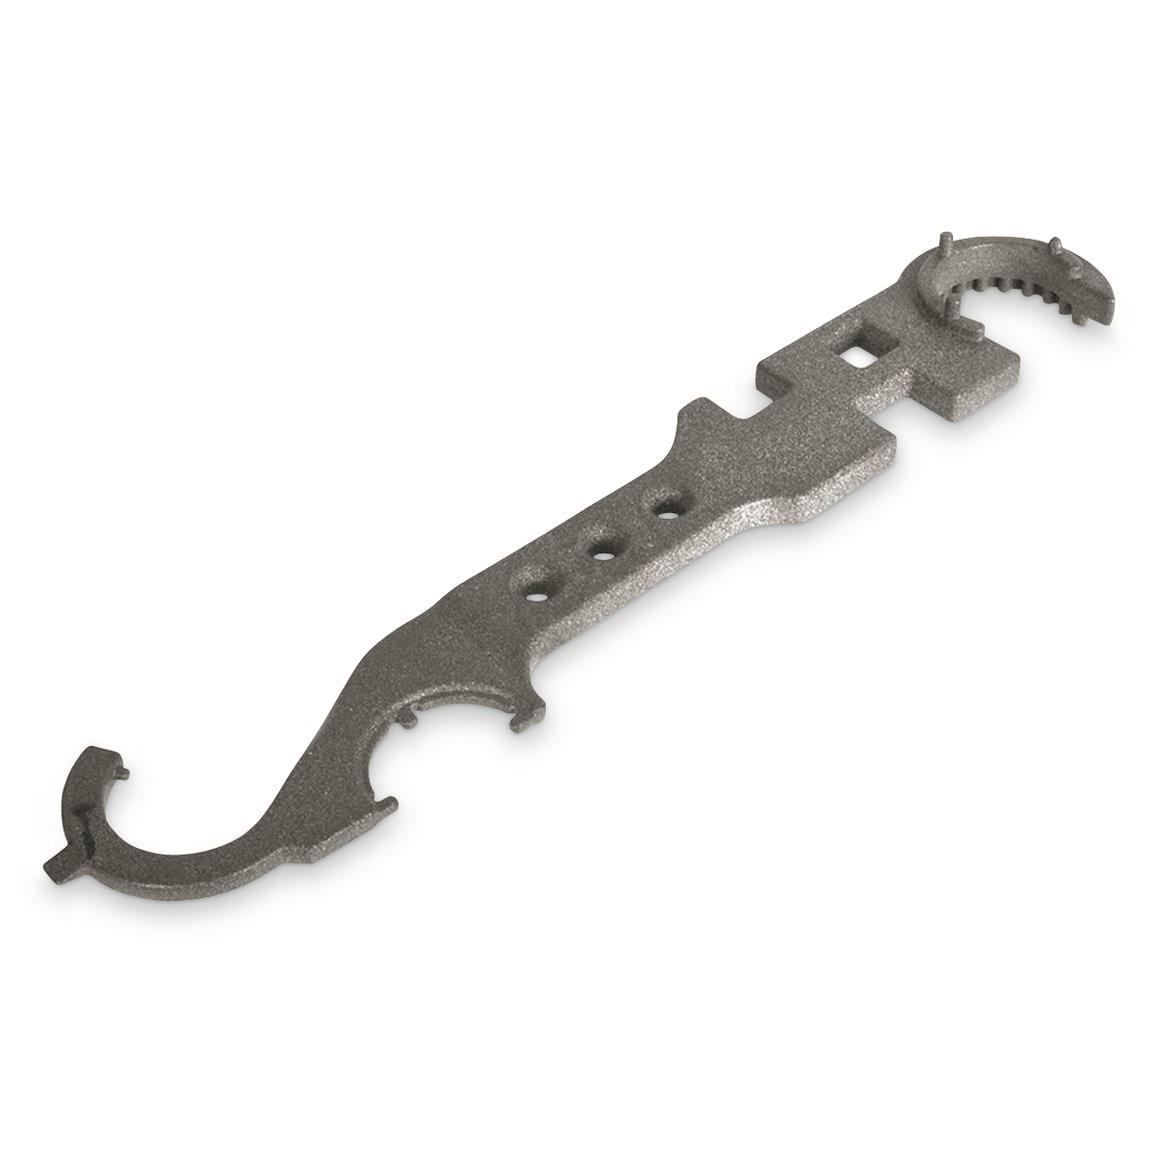 HQ ISSUE AR-15/M4 Combo Wrench Tool